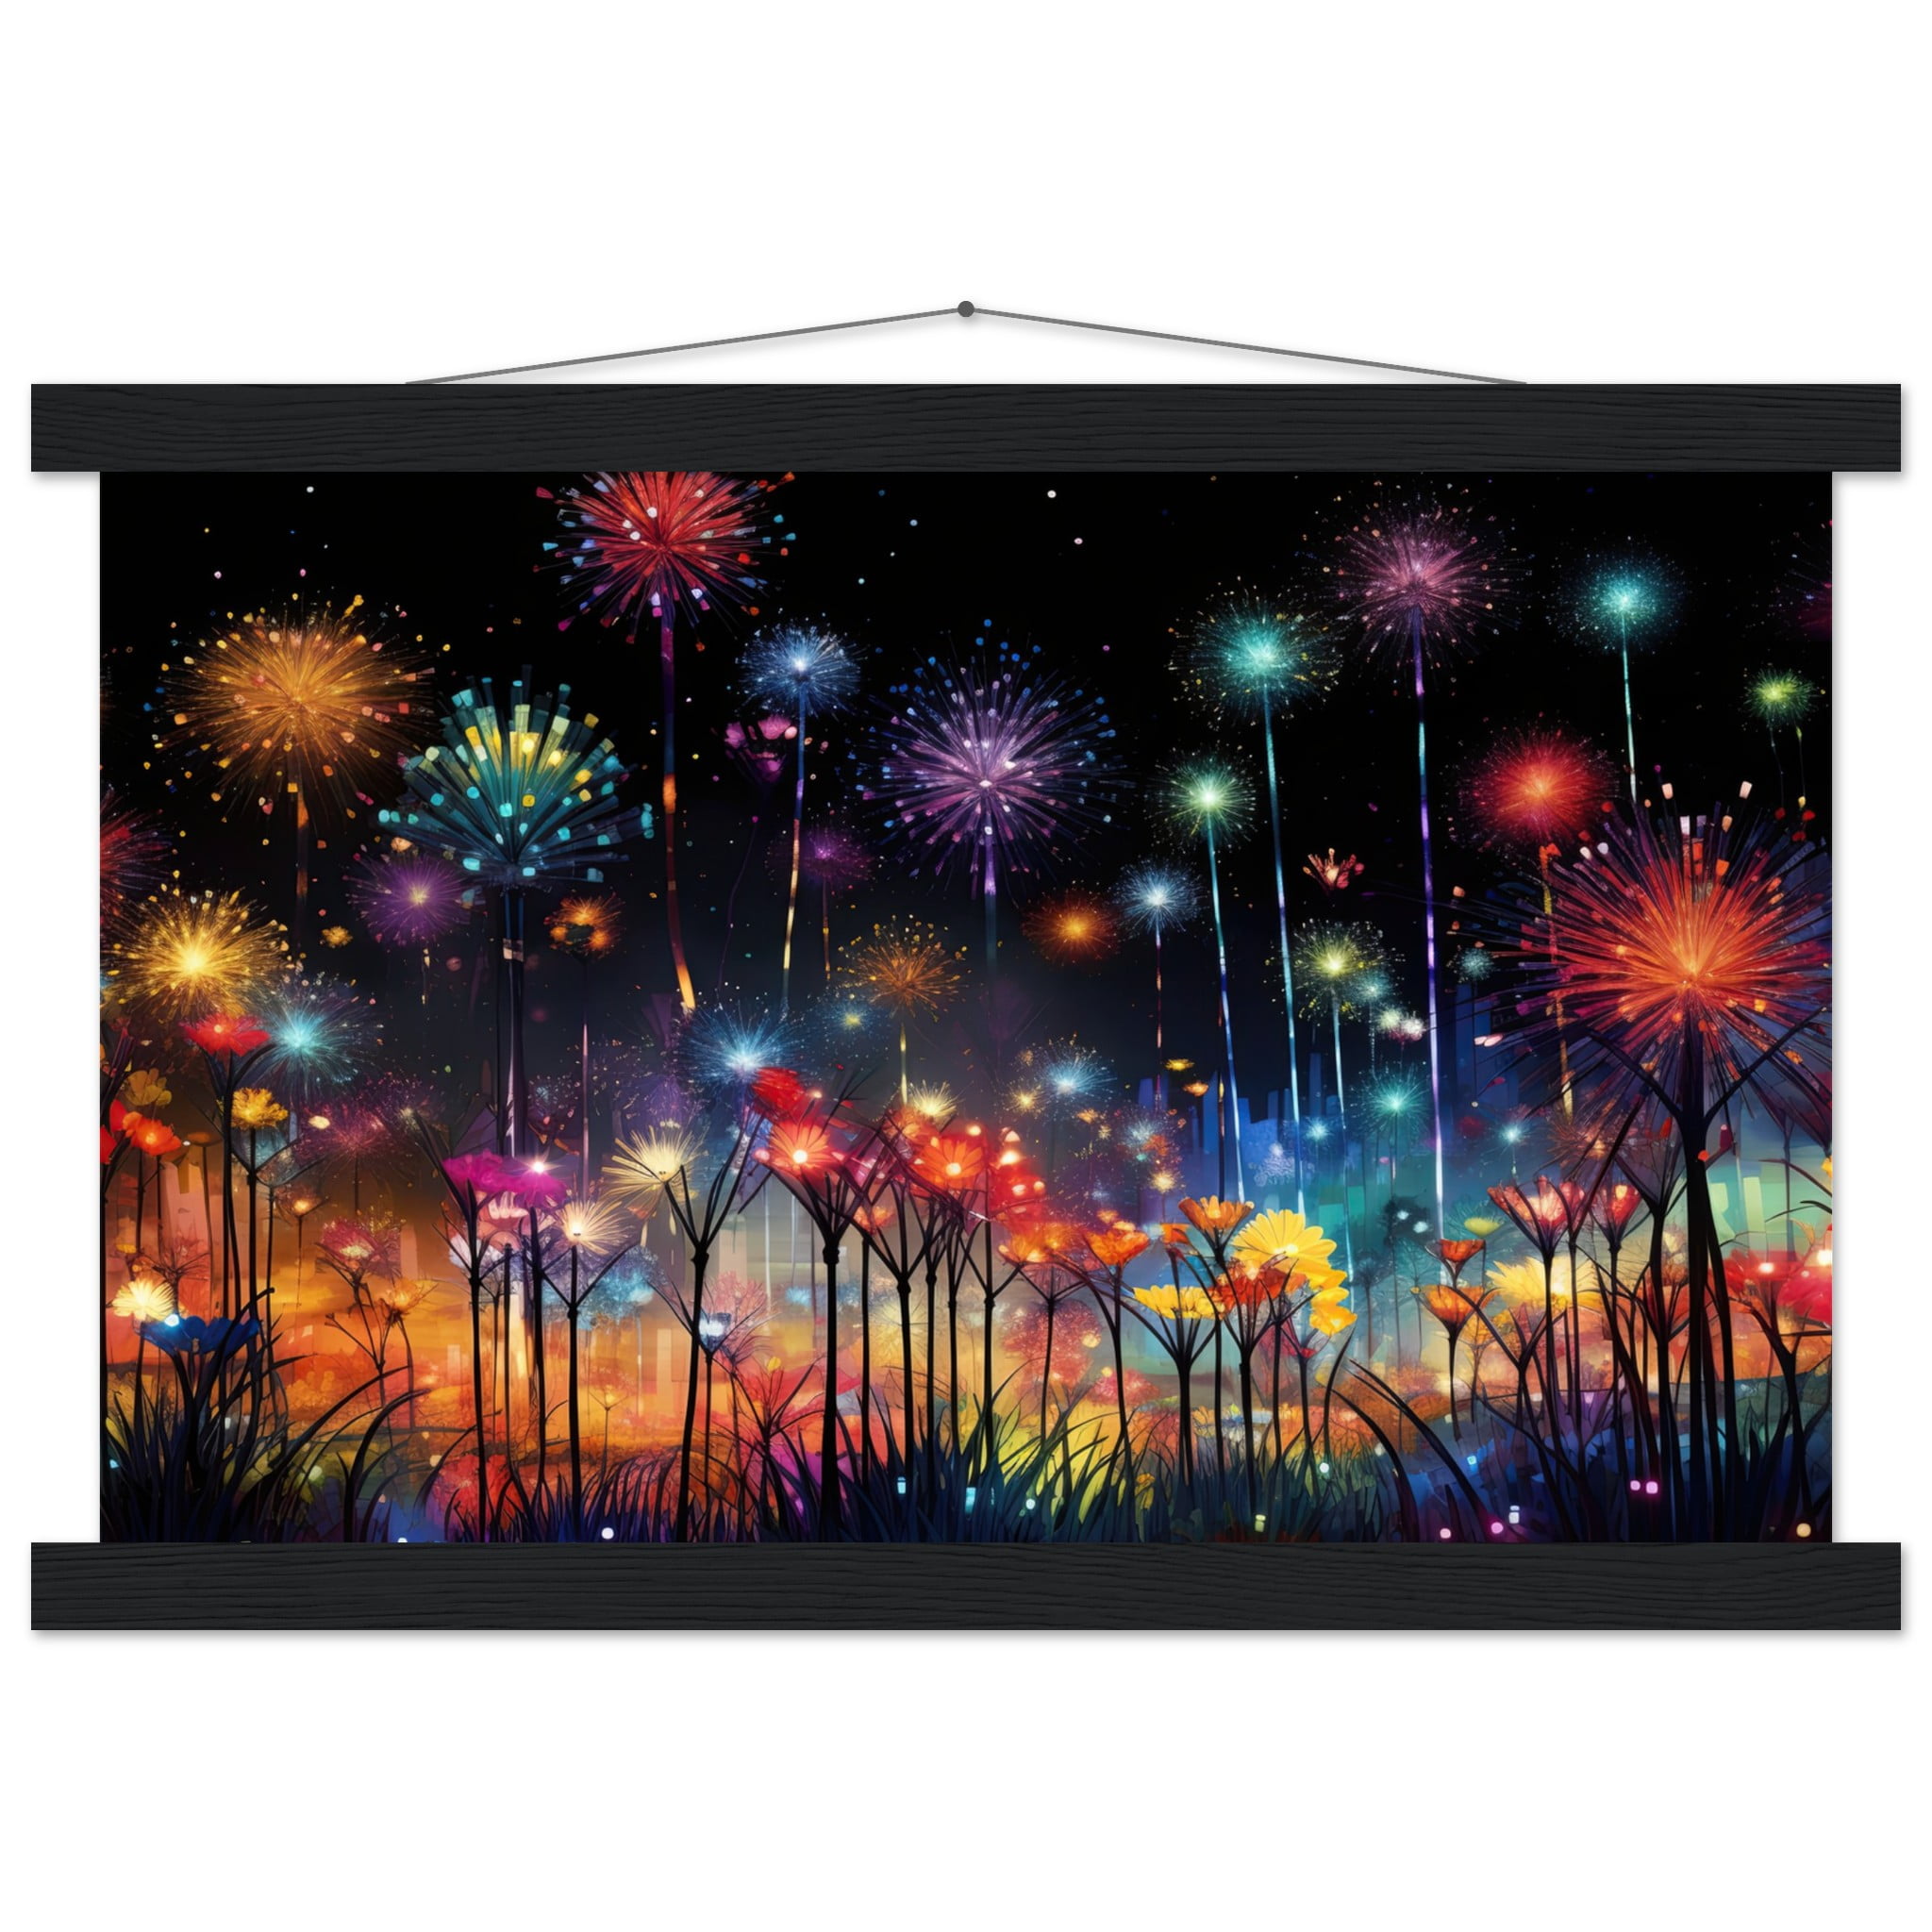 Fireworks and Flowers of Light and Color – Art Print with Hanger – 30×45 cm / 12×18″, Black wall hanger